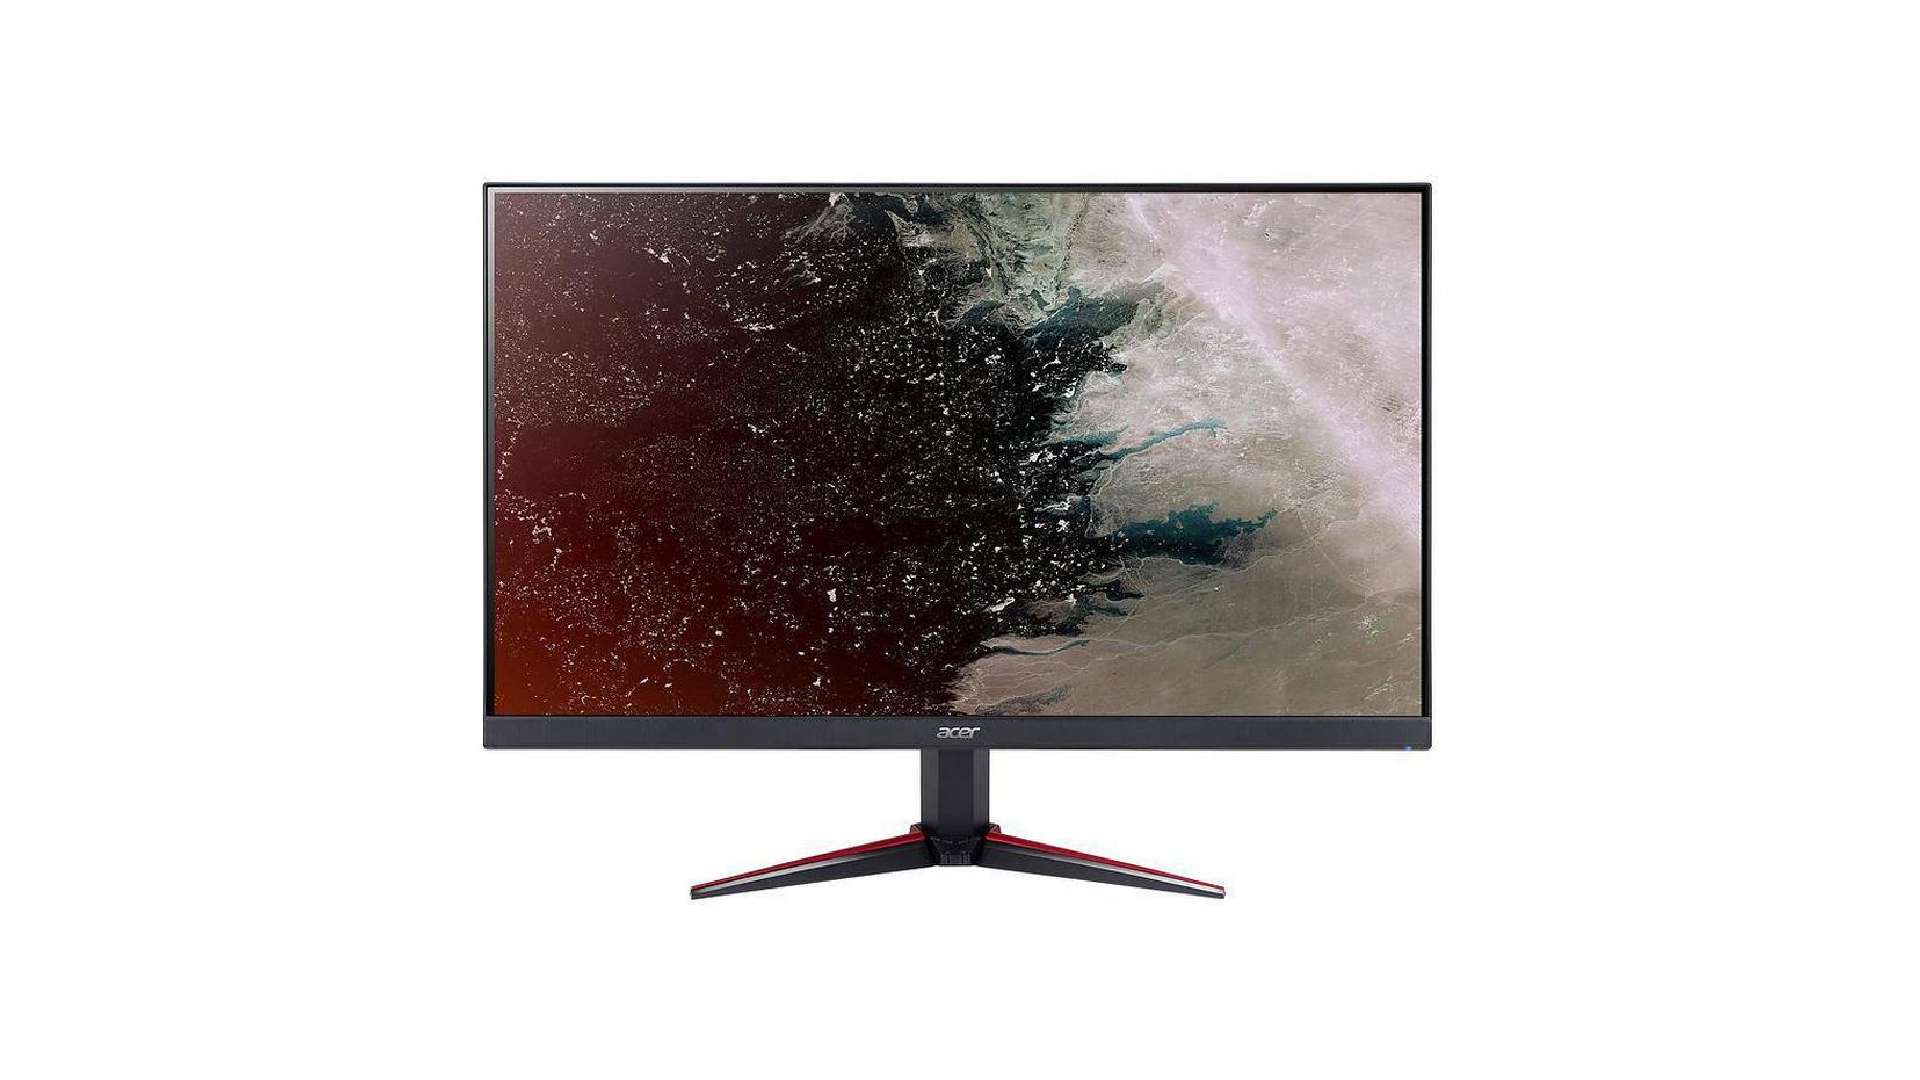 The Acer Nitro VG240Y gaming monitor looks ahead at product photos against a white background.